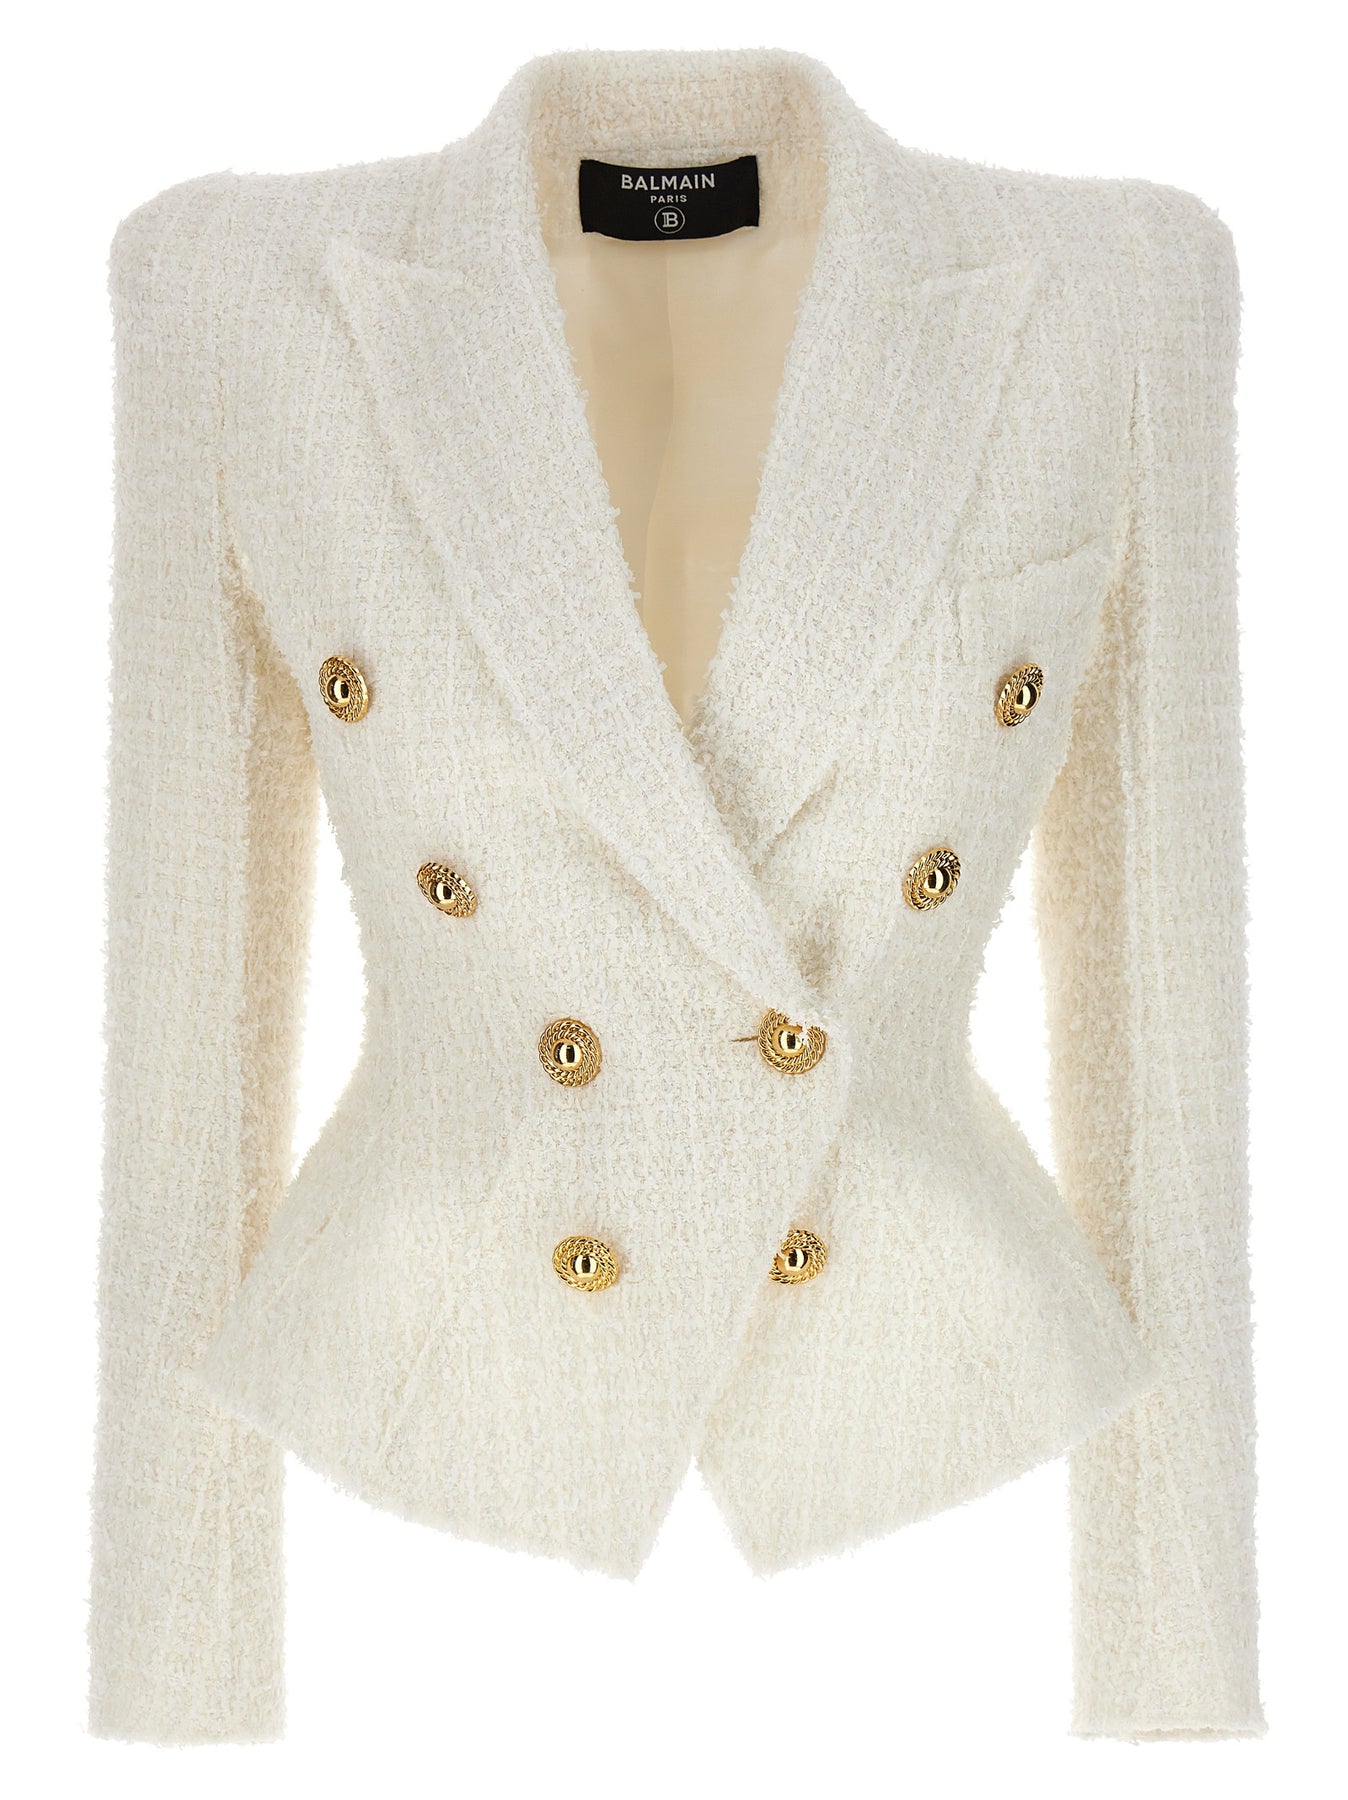 BALMAIN DOUBLE-BREASTED TWEED BLAZER WITH LOGO BUTTONS BLAZER AND SUITS